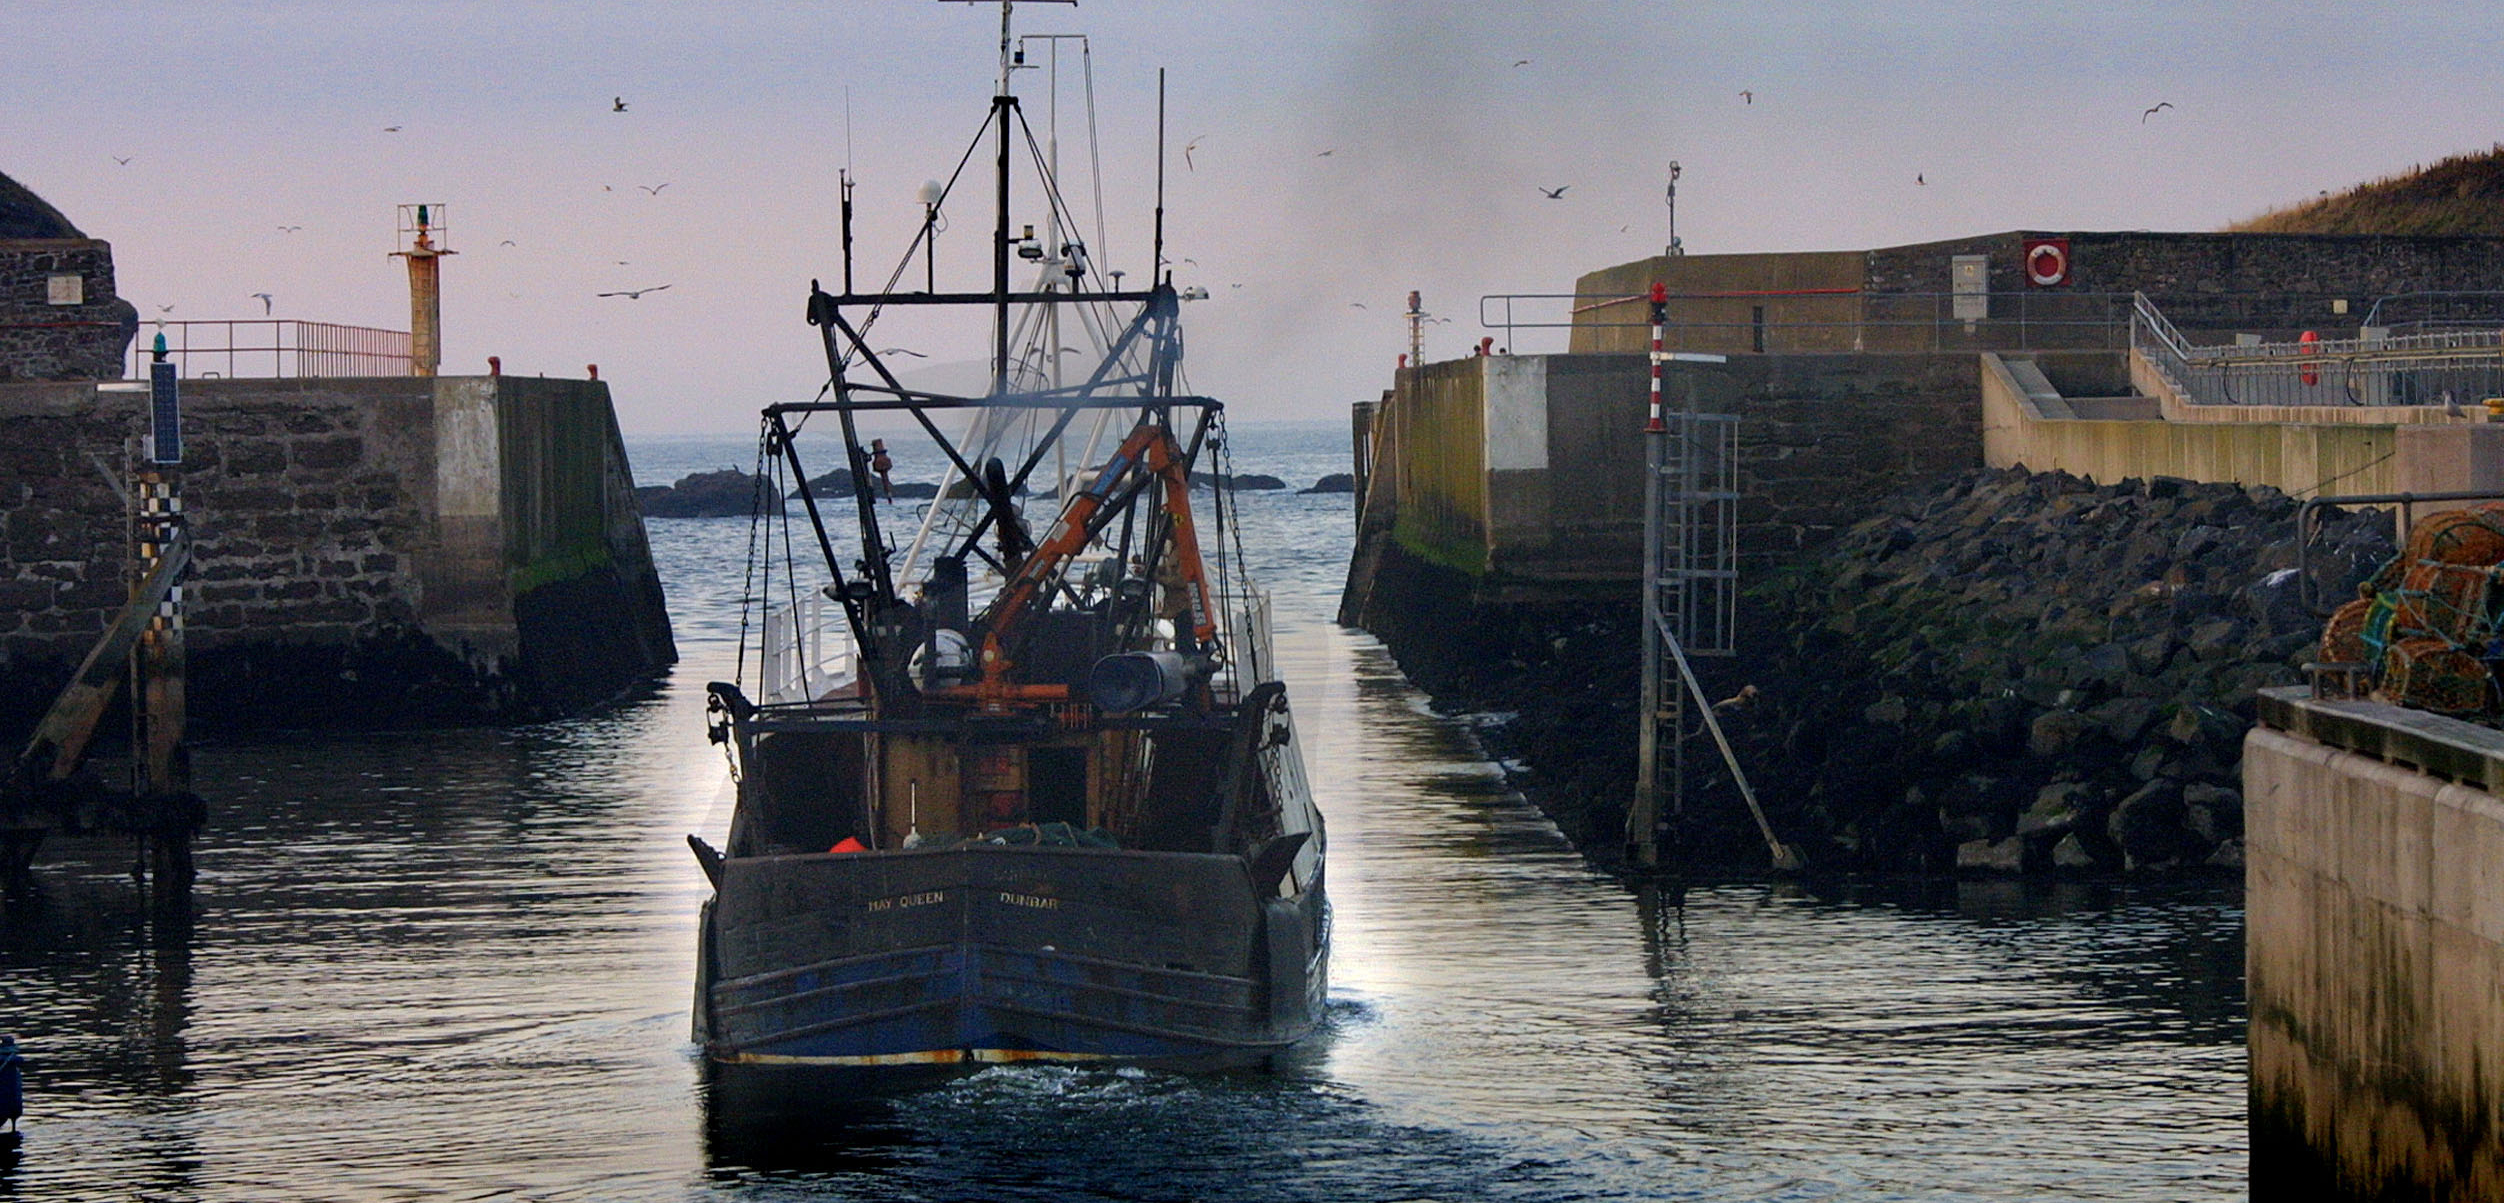 A fishing boat leaves from Eyemouth, Scotland, on October 31, 2002. Photo by Colin McPherson/Corbis